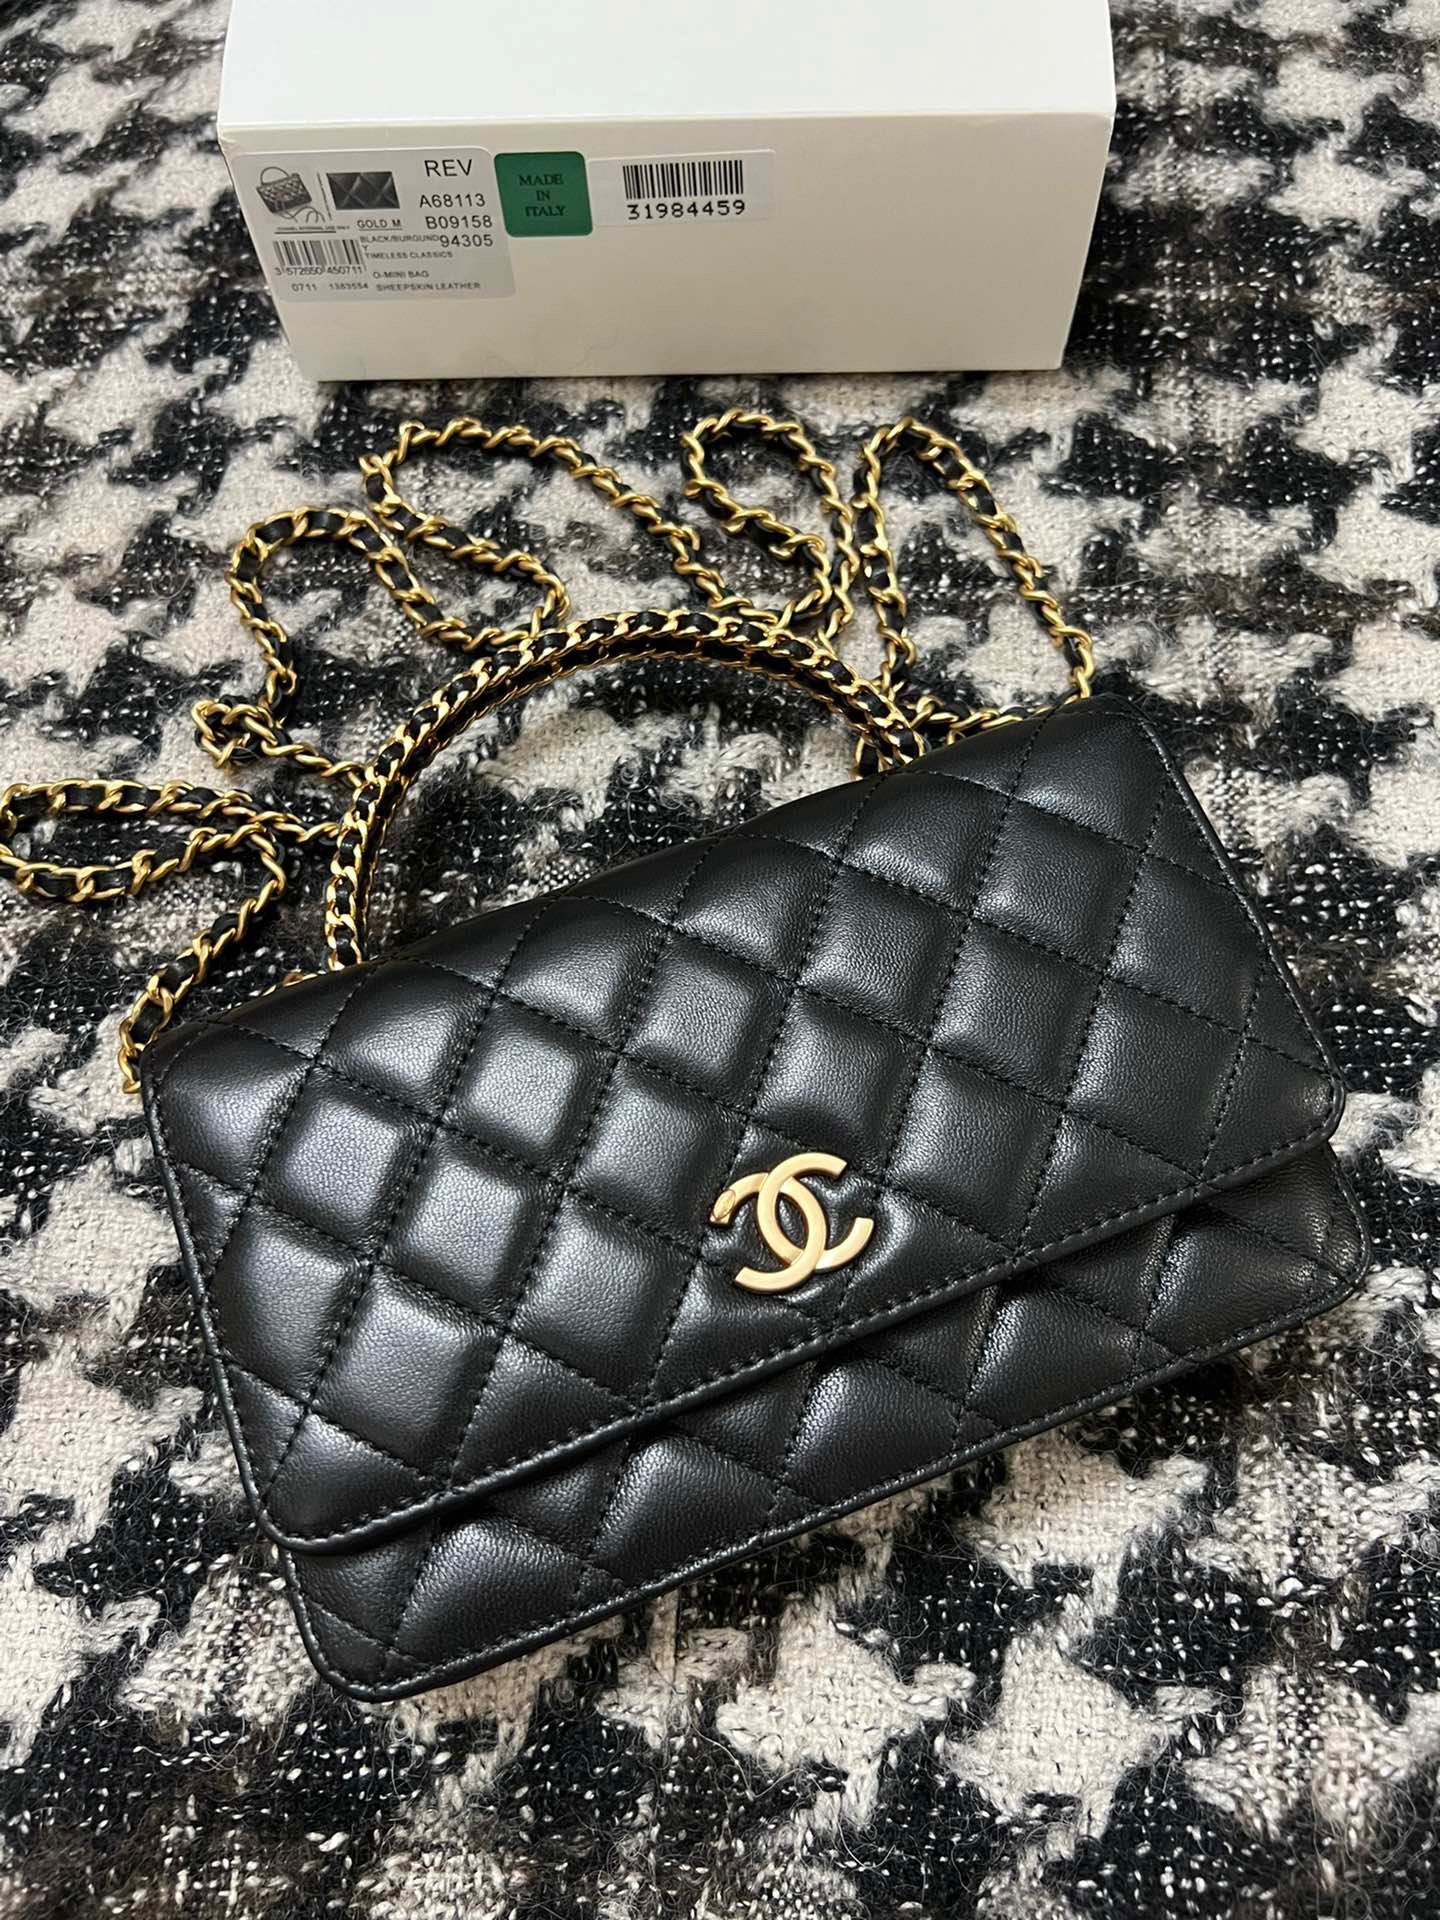 CHANEL Wallet On Chain With Signature Handle